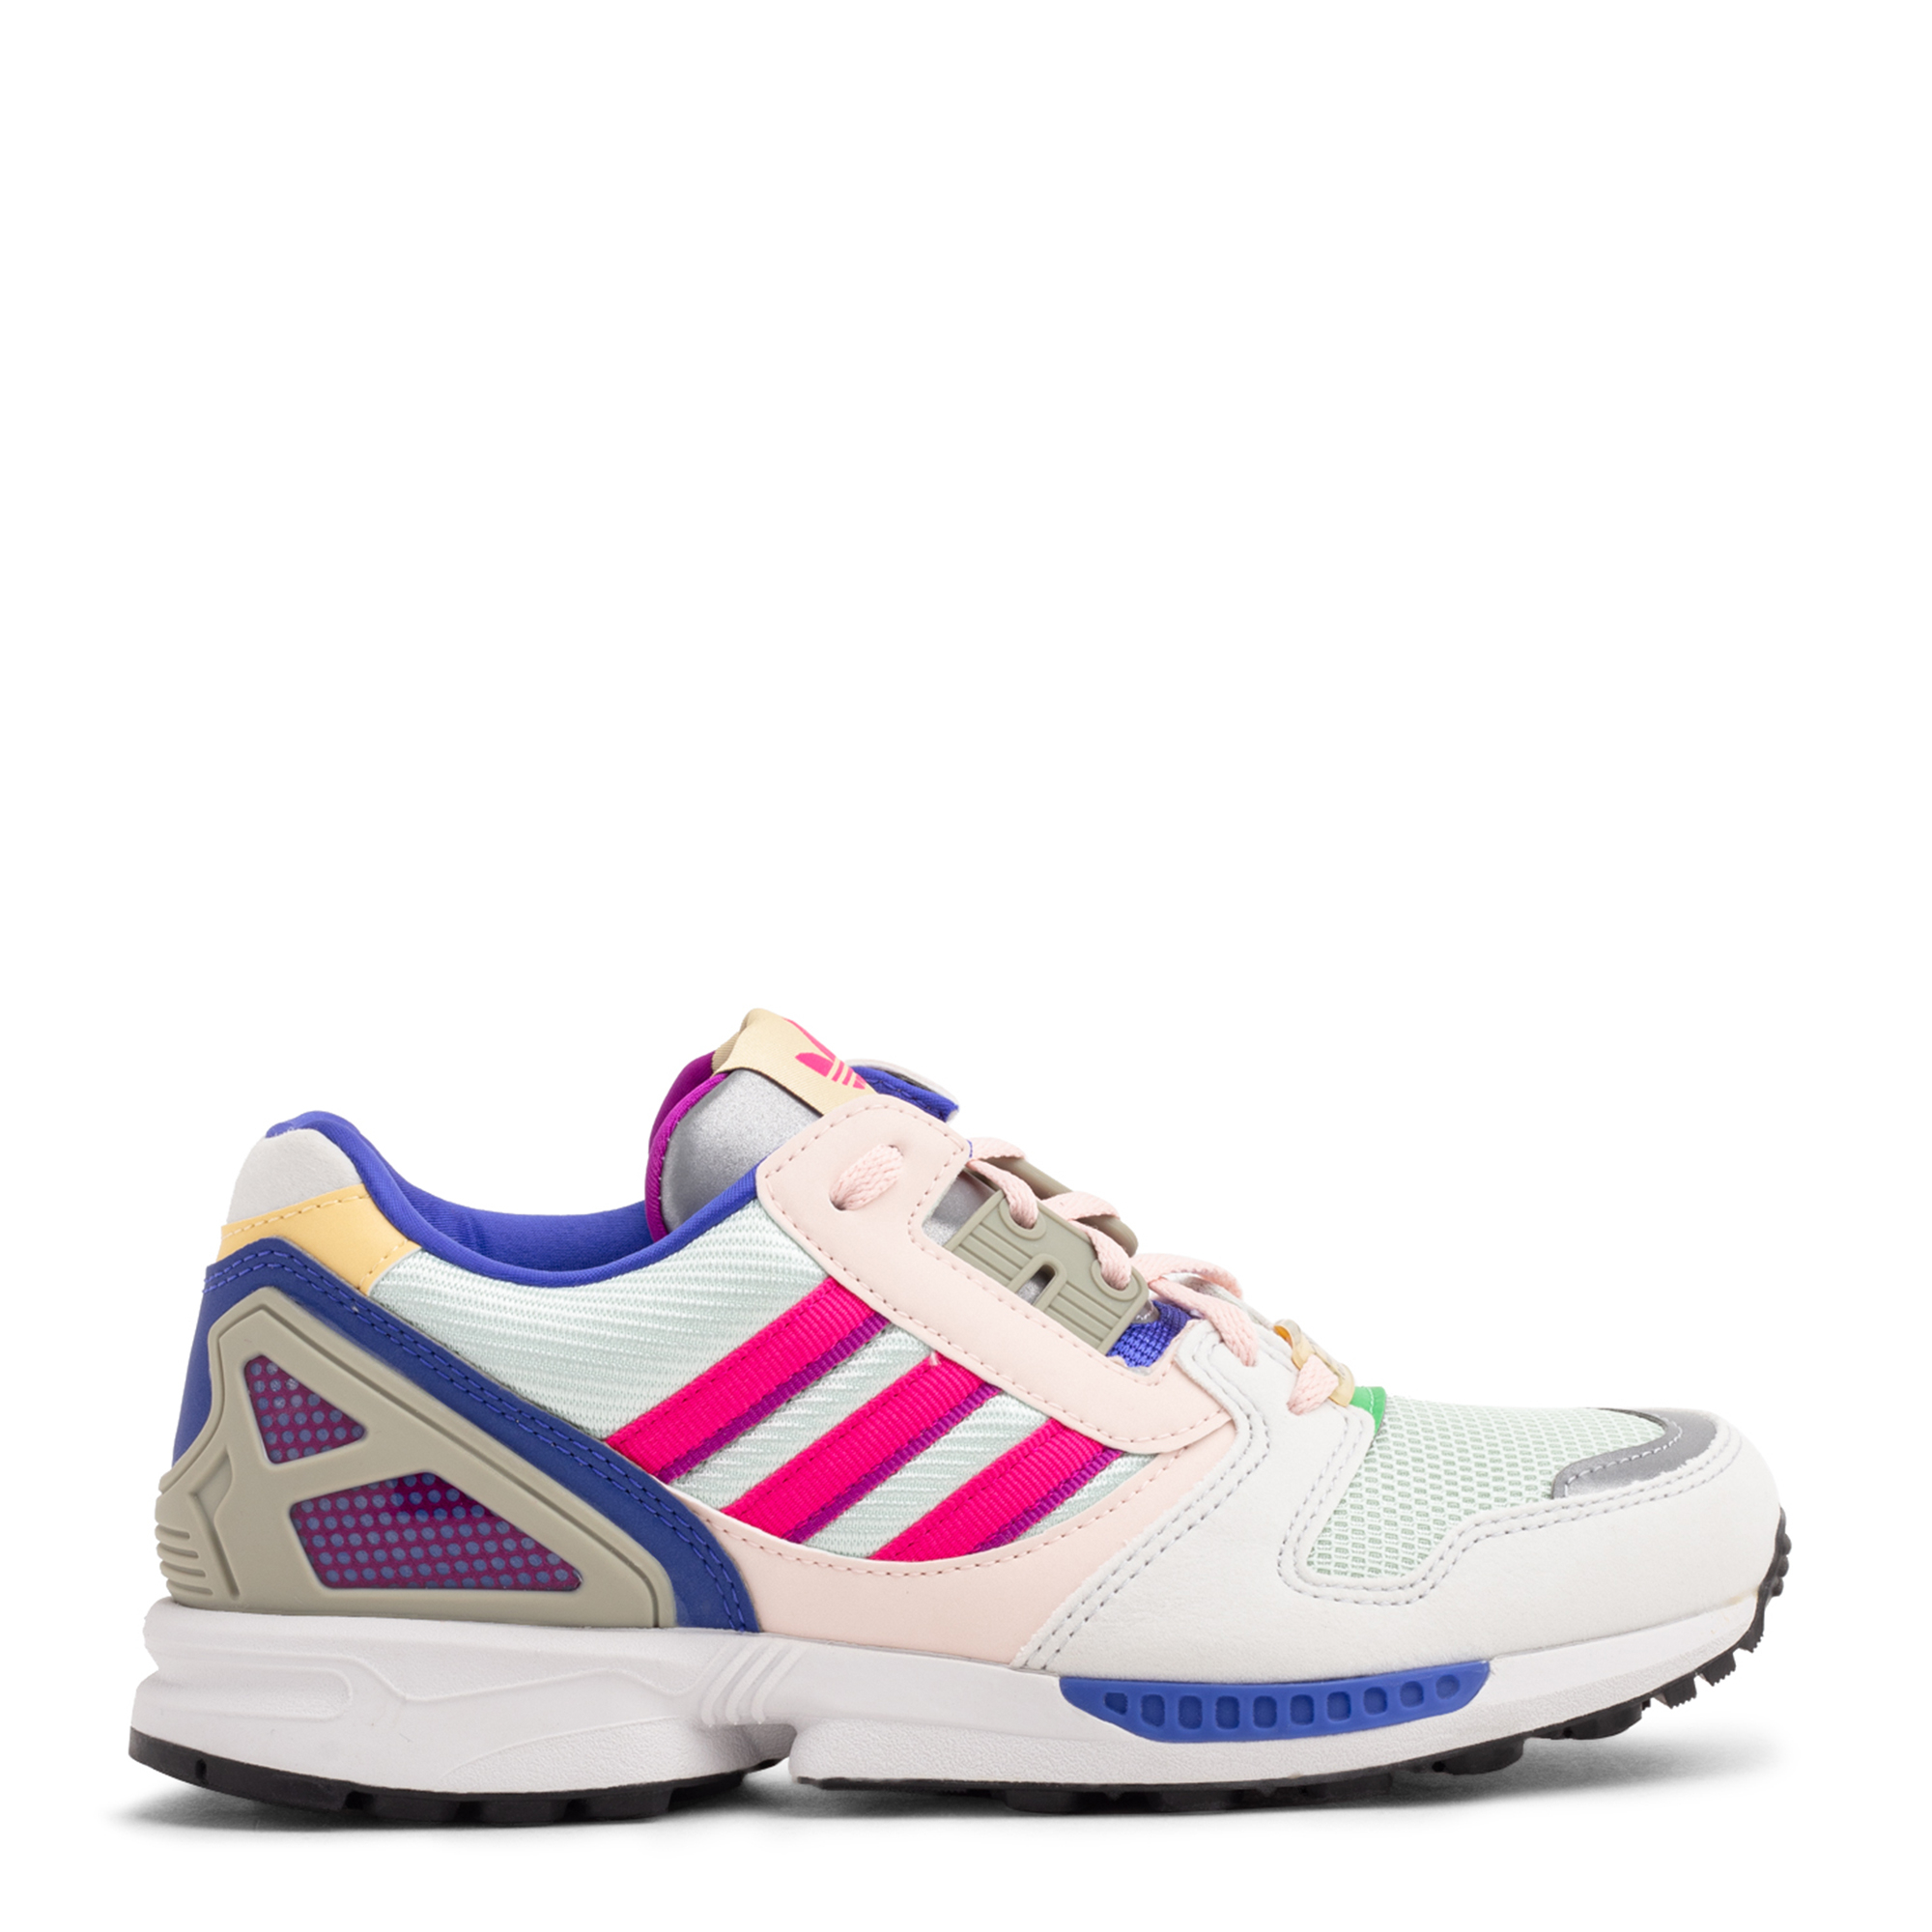 Adidas ZX 8000 sneakers for Women - White in UAE | Level Shoes